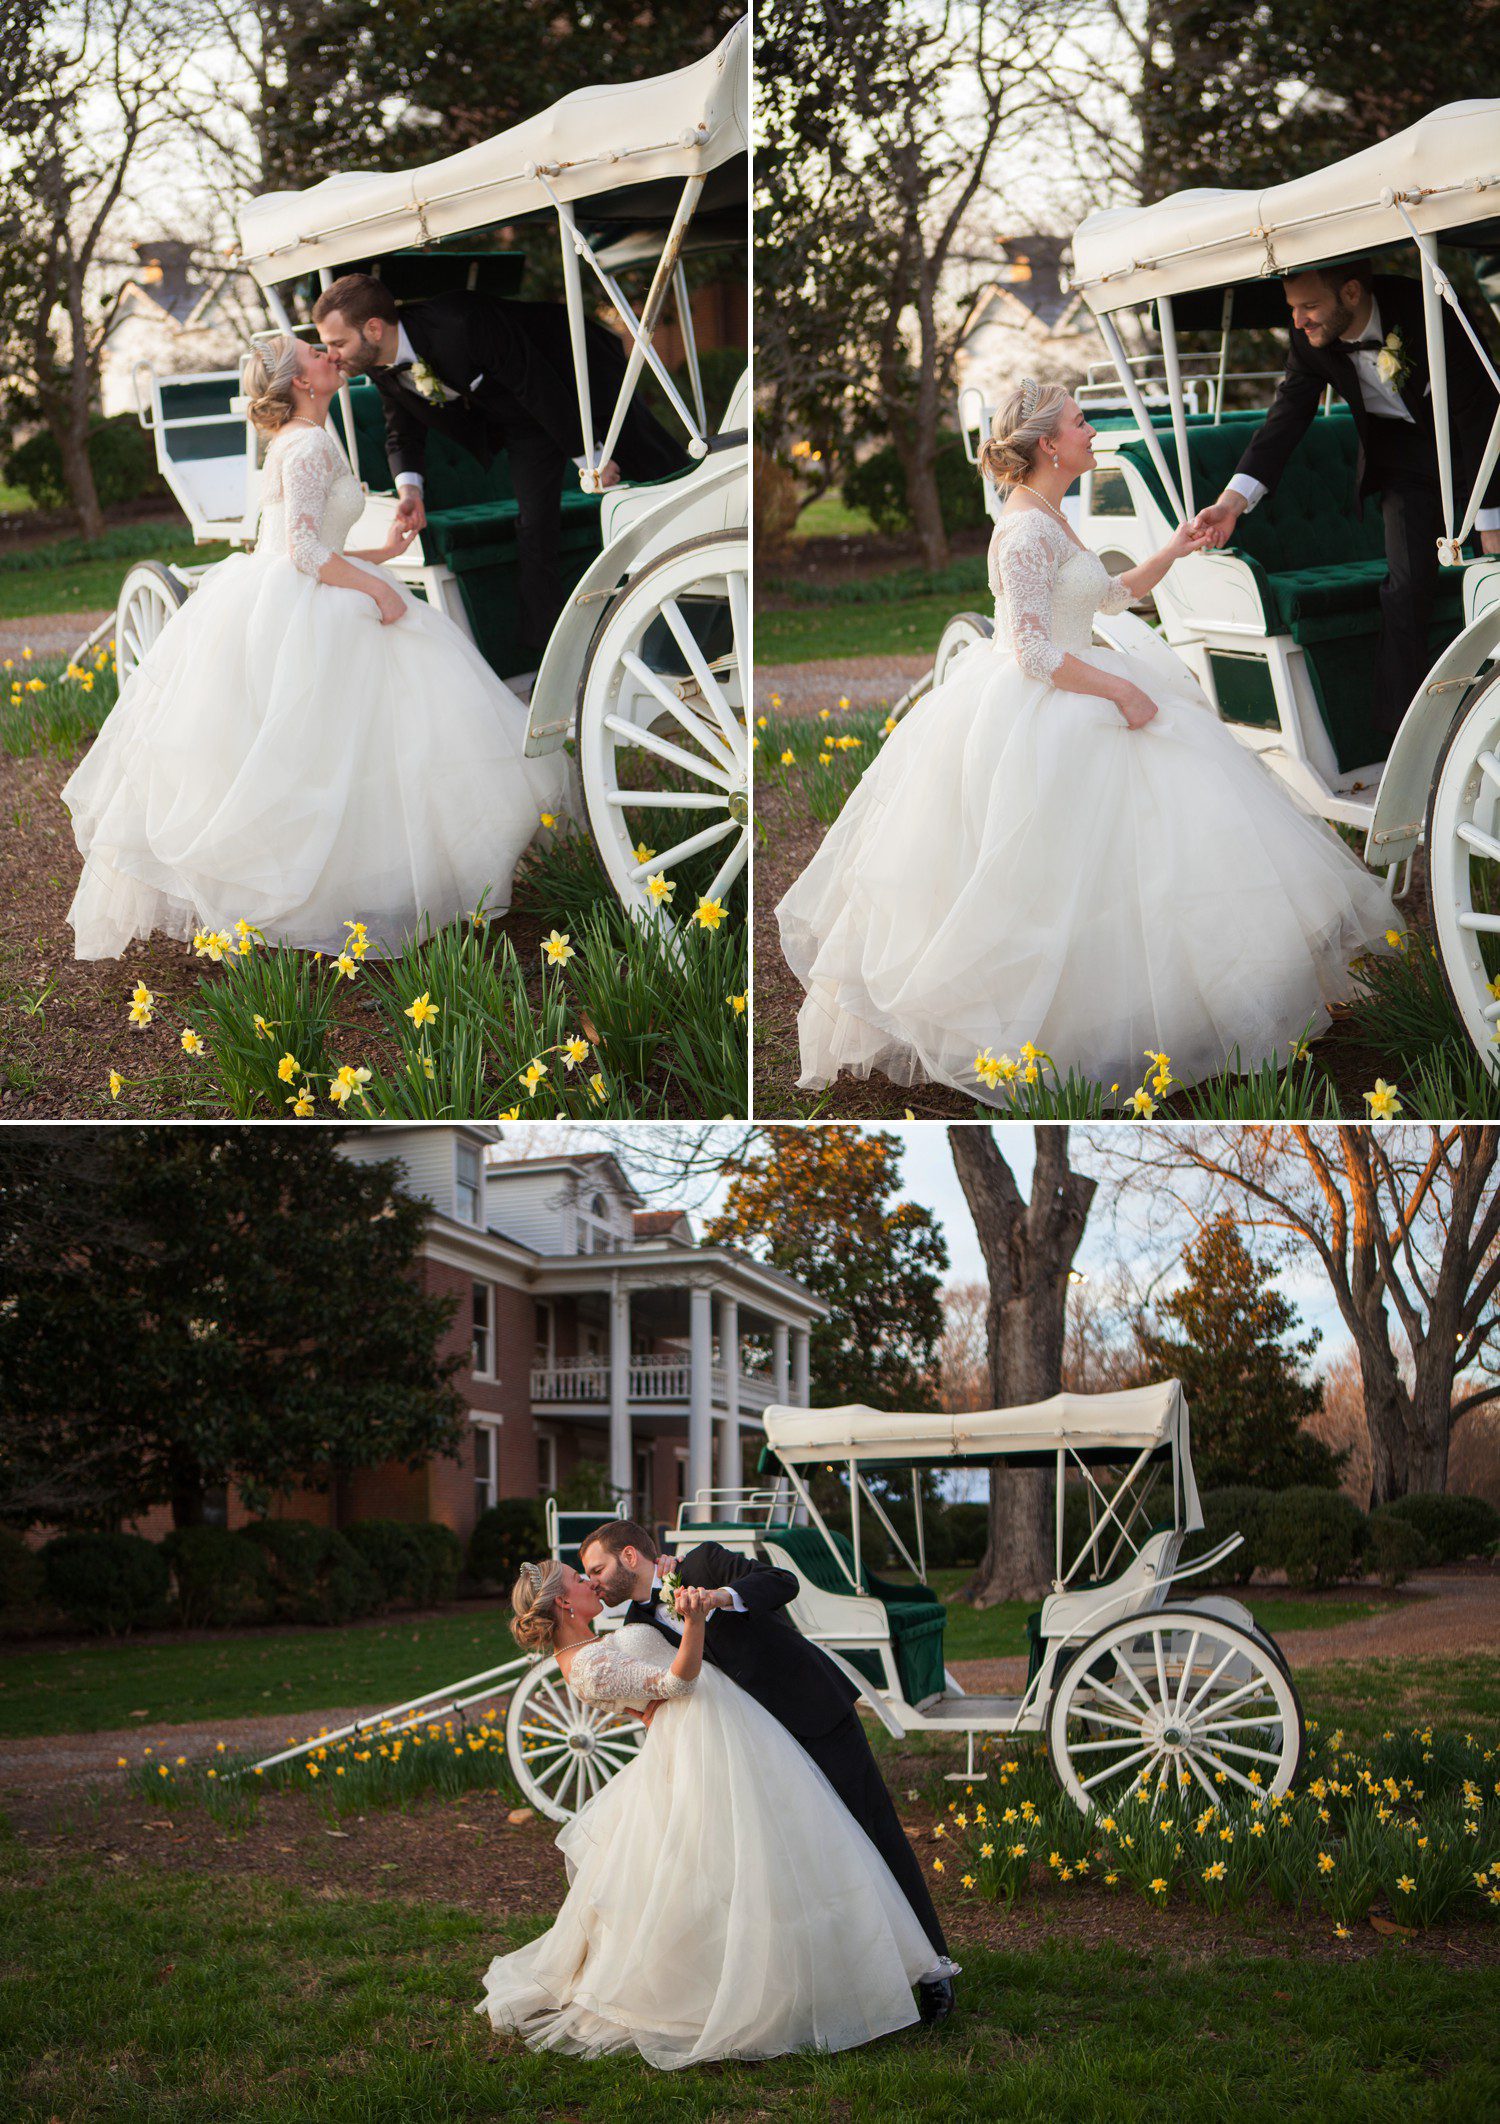 Bride and groom after wedding outside antebellum mansion in carriage at Homestead Manor in Thompsons Station, TN / Krista Lee Photography